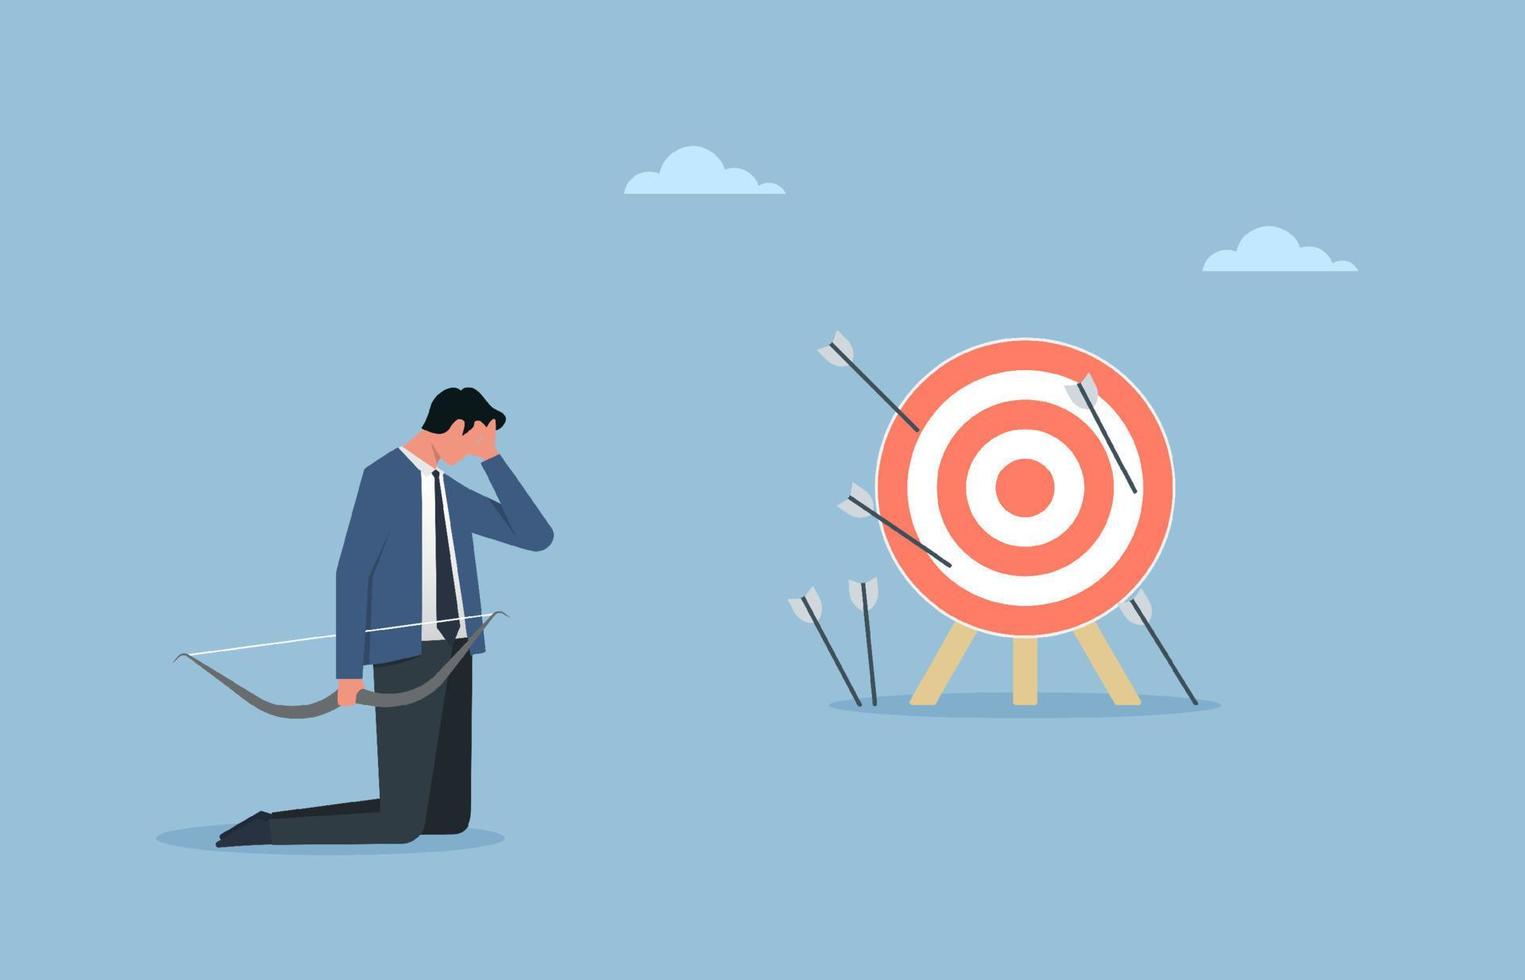 Business challenge failure metaphor, multiple failed inaccurate attempts to hit archery target, despair or disappointment from losing opportunity vector